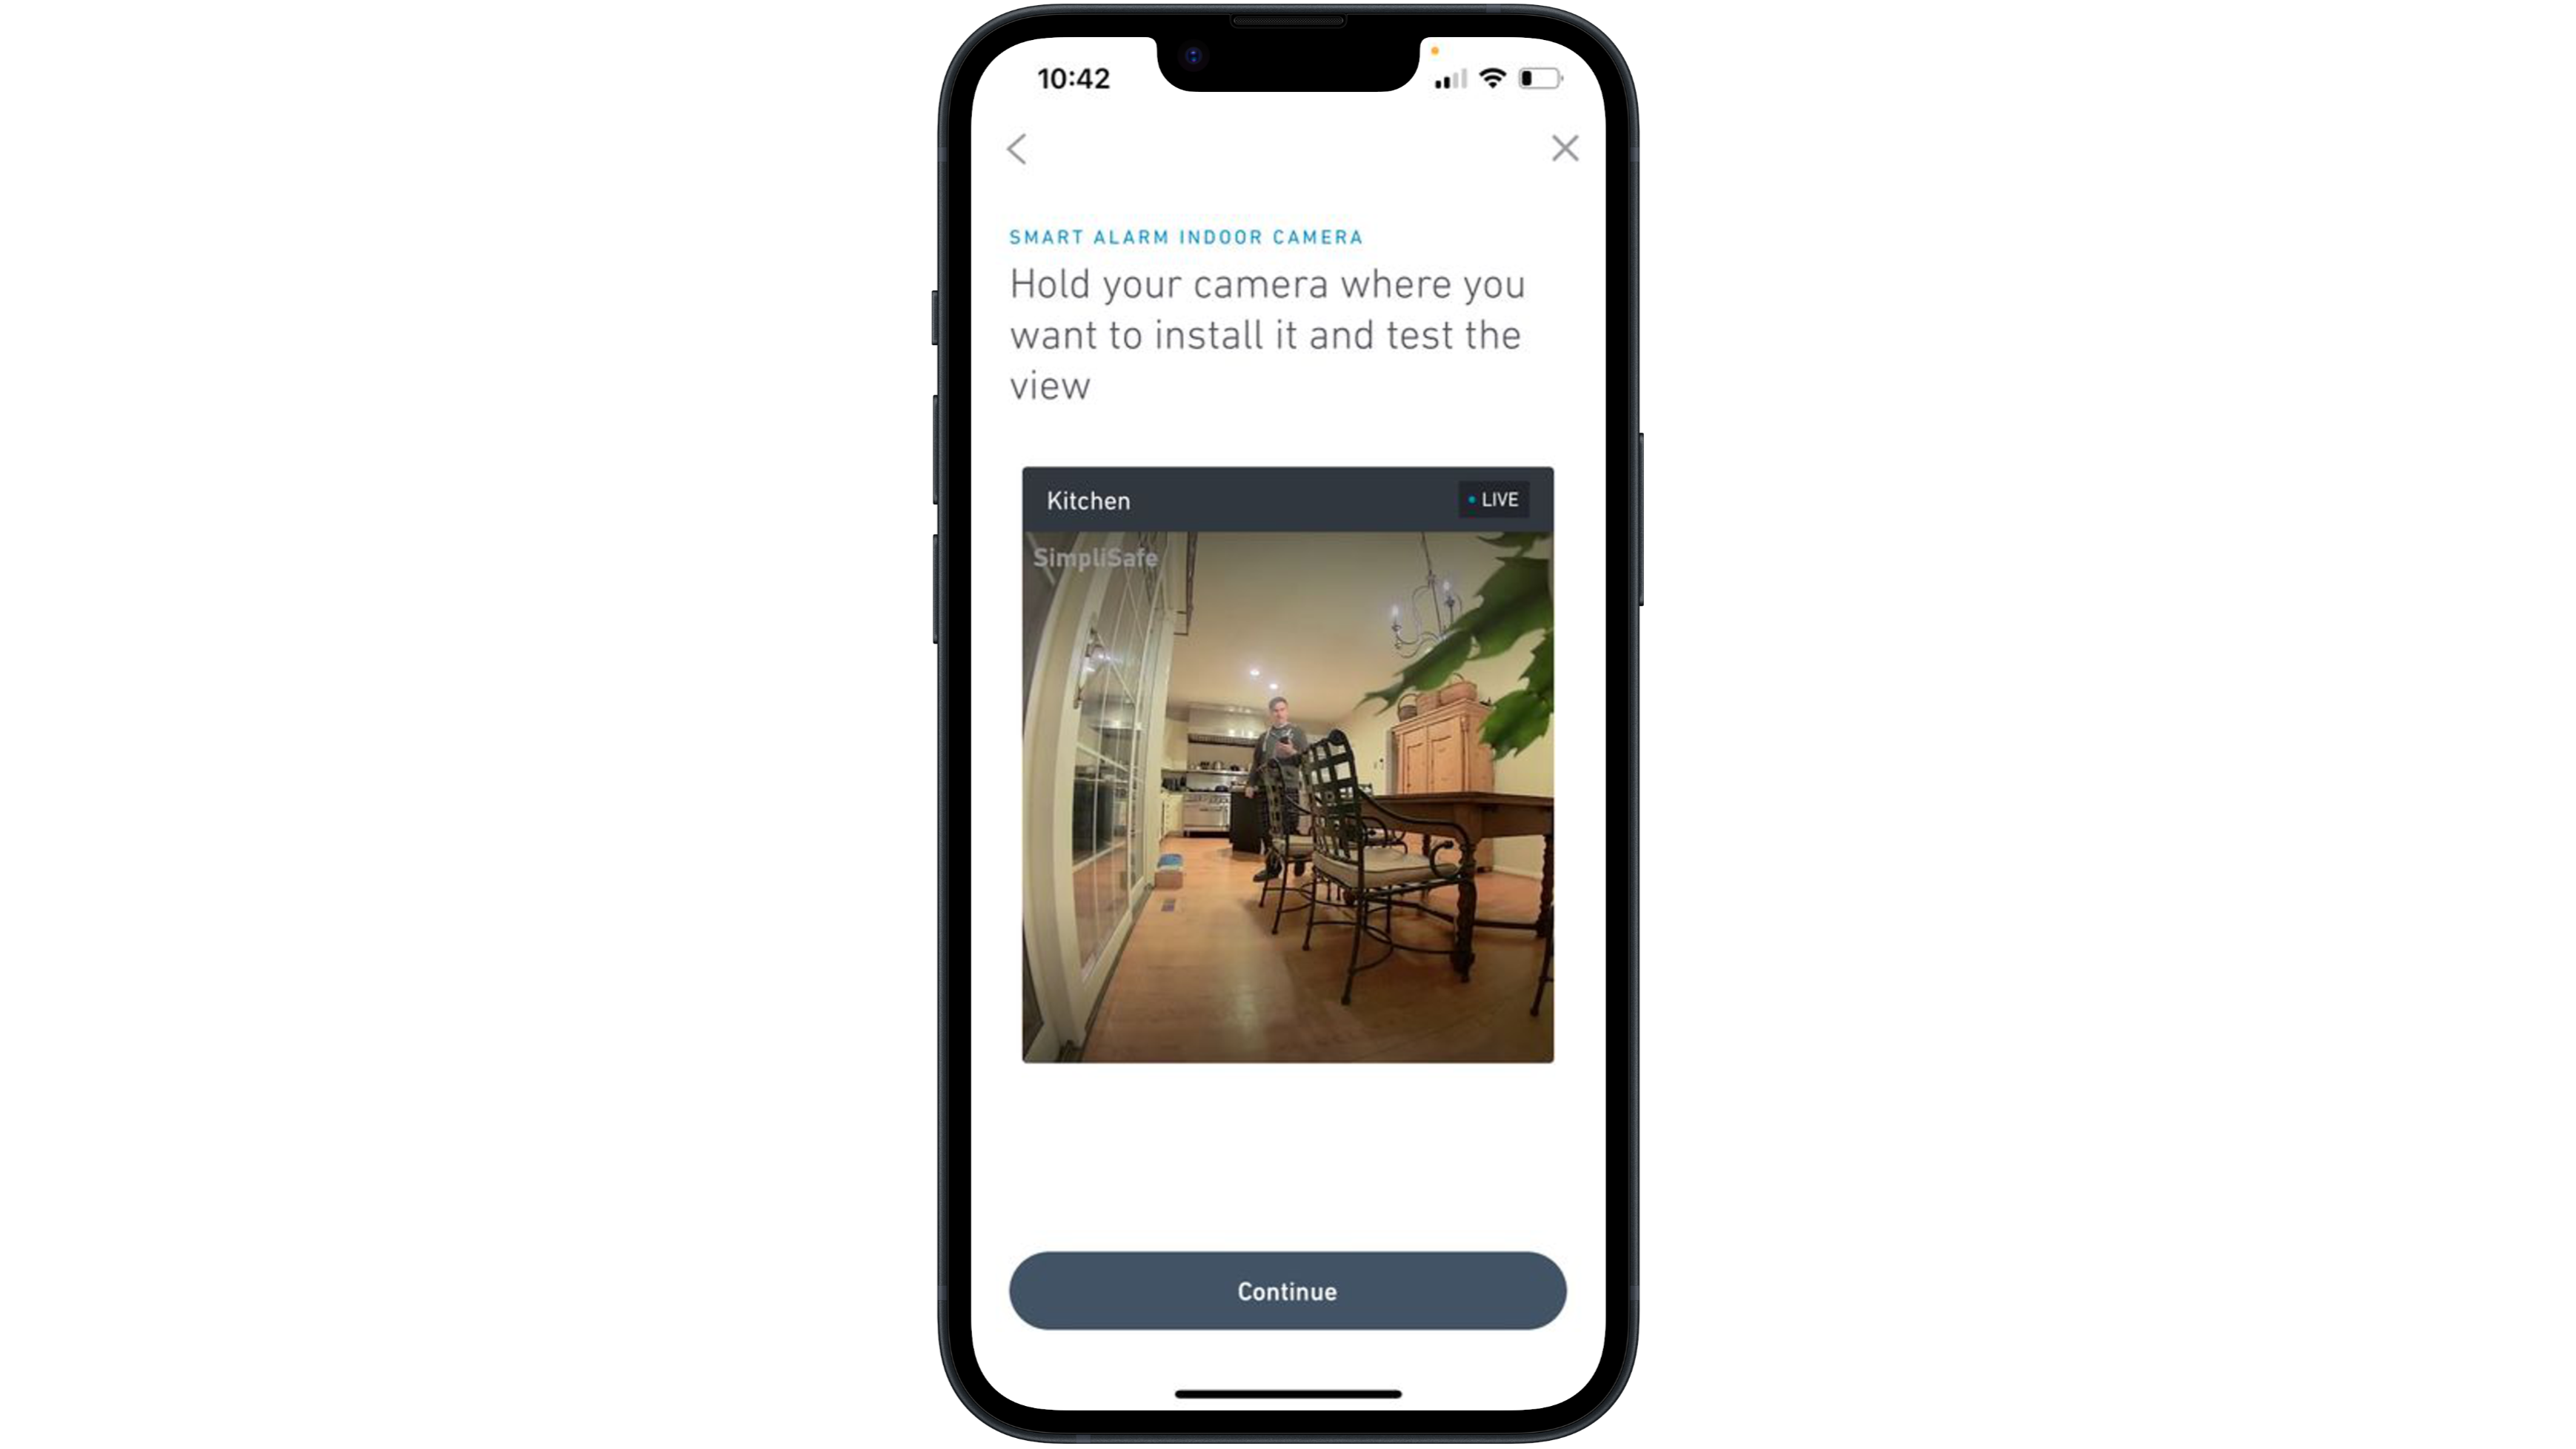 Simplisafe home security system app on an iPhone showing the camera setup